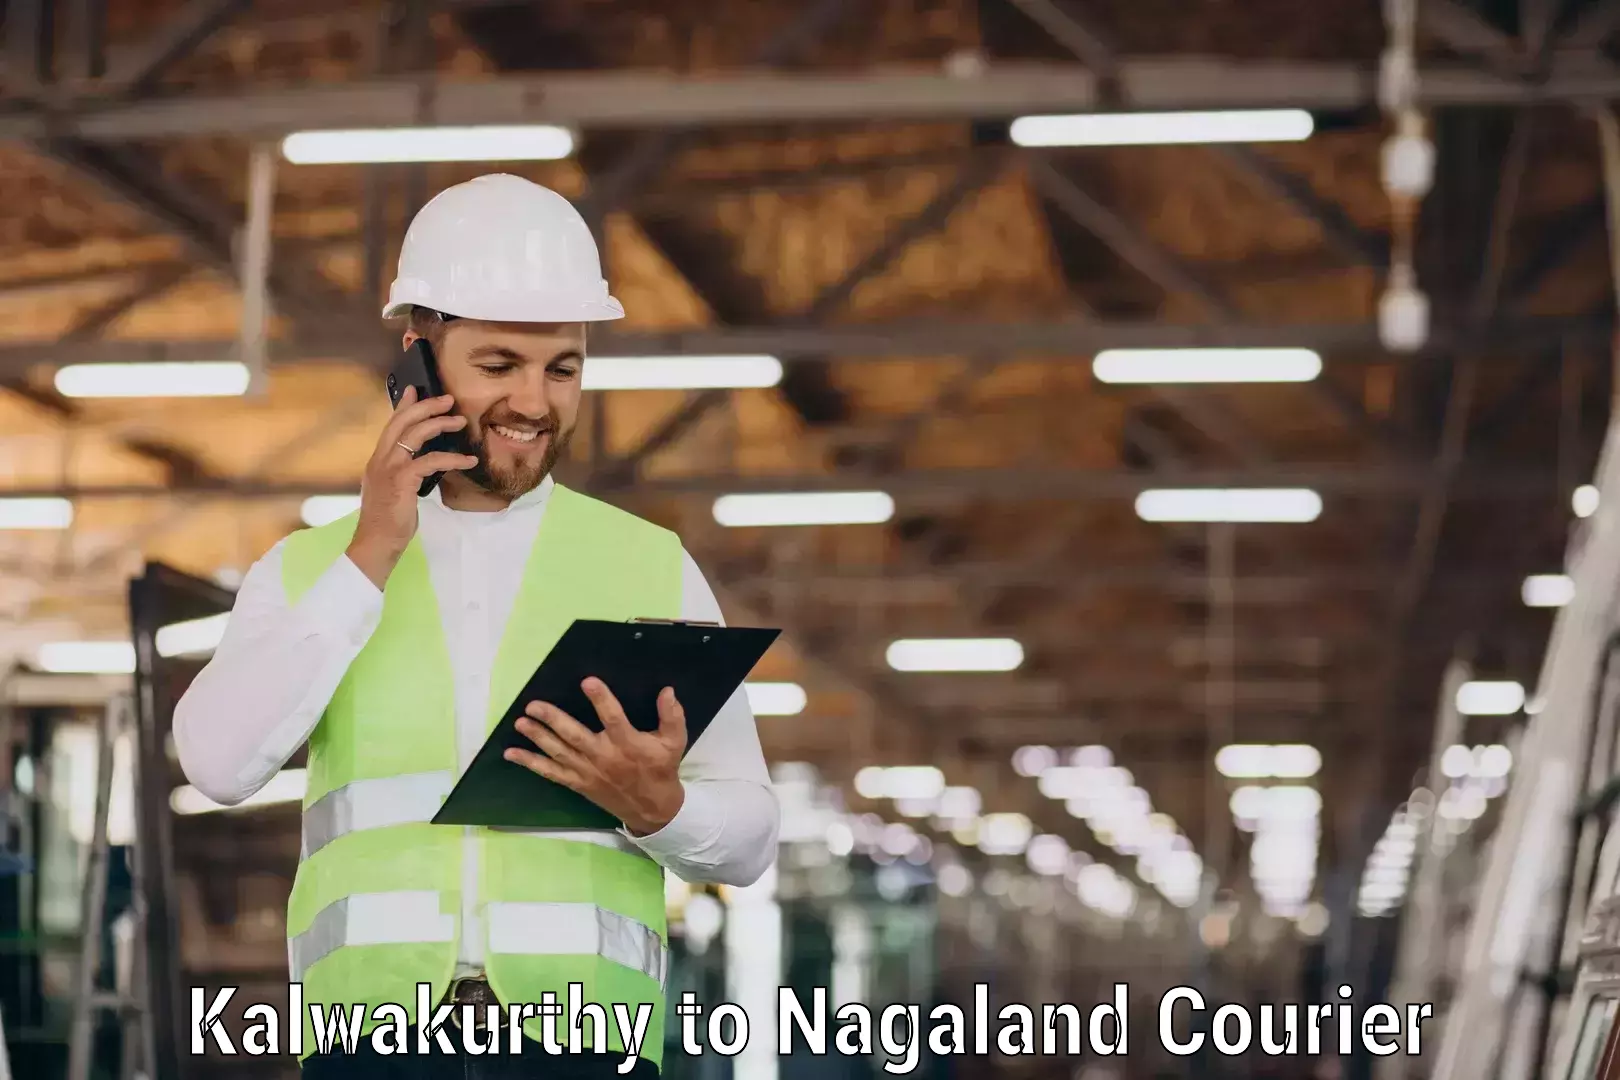 24/7 courier service in Kalwakurthy to Nagaland